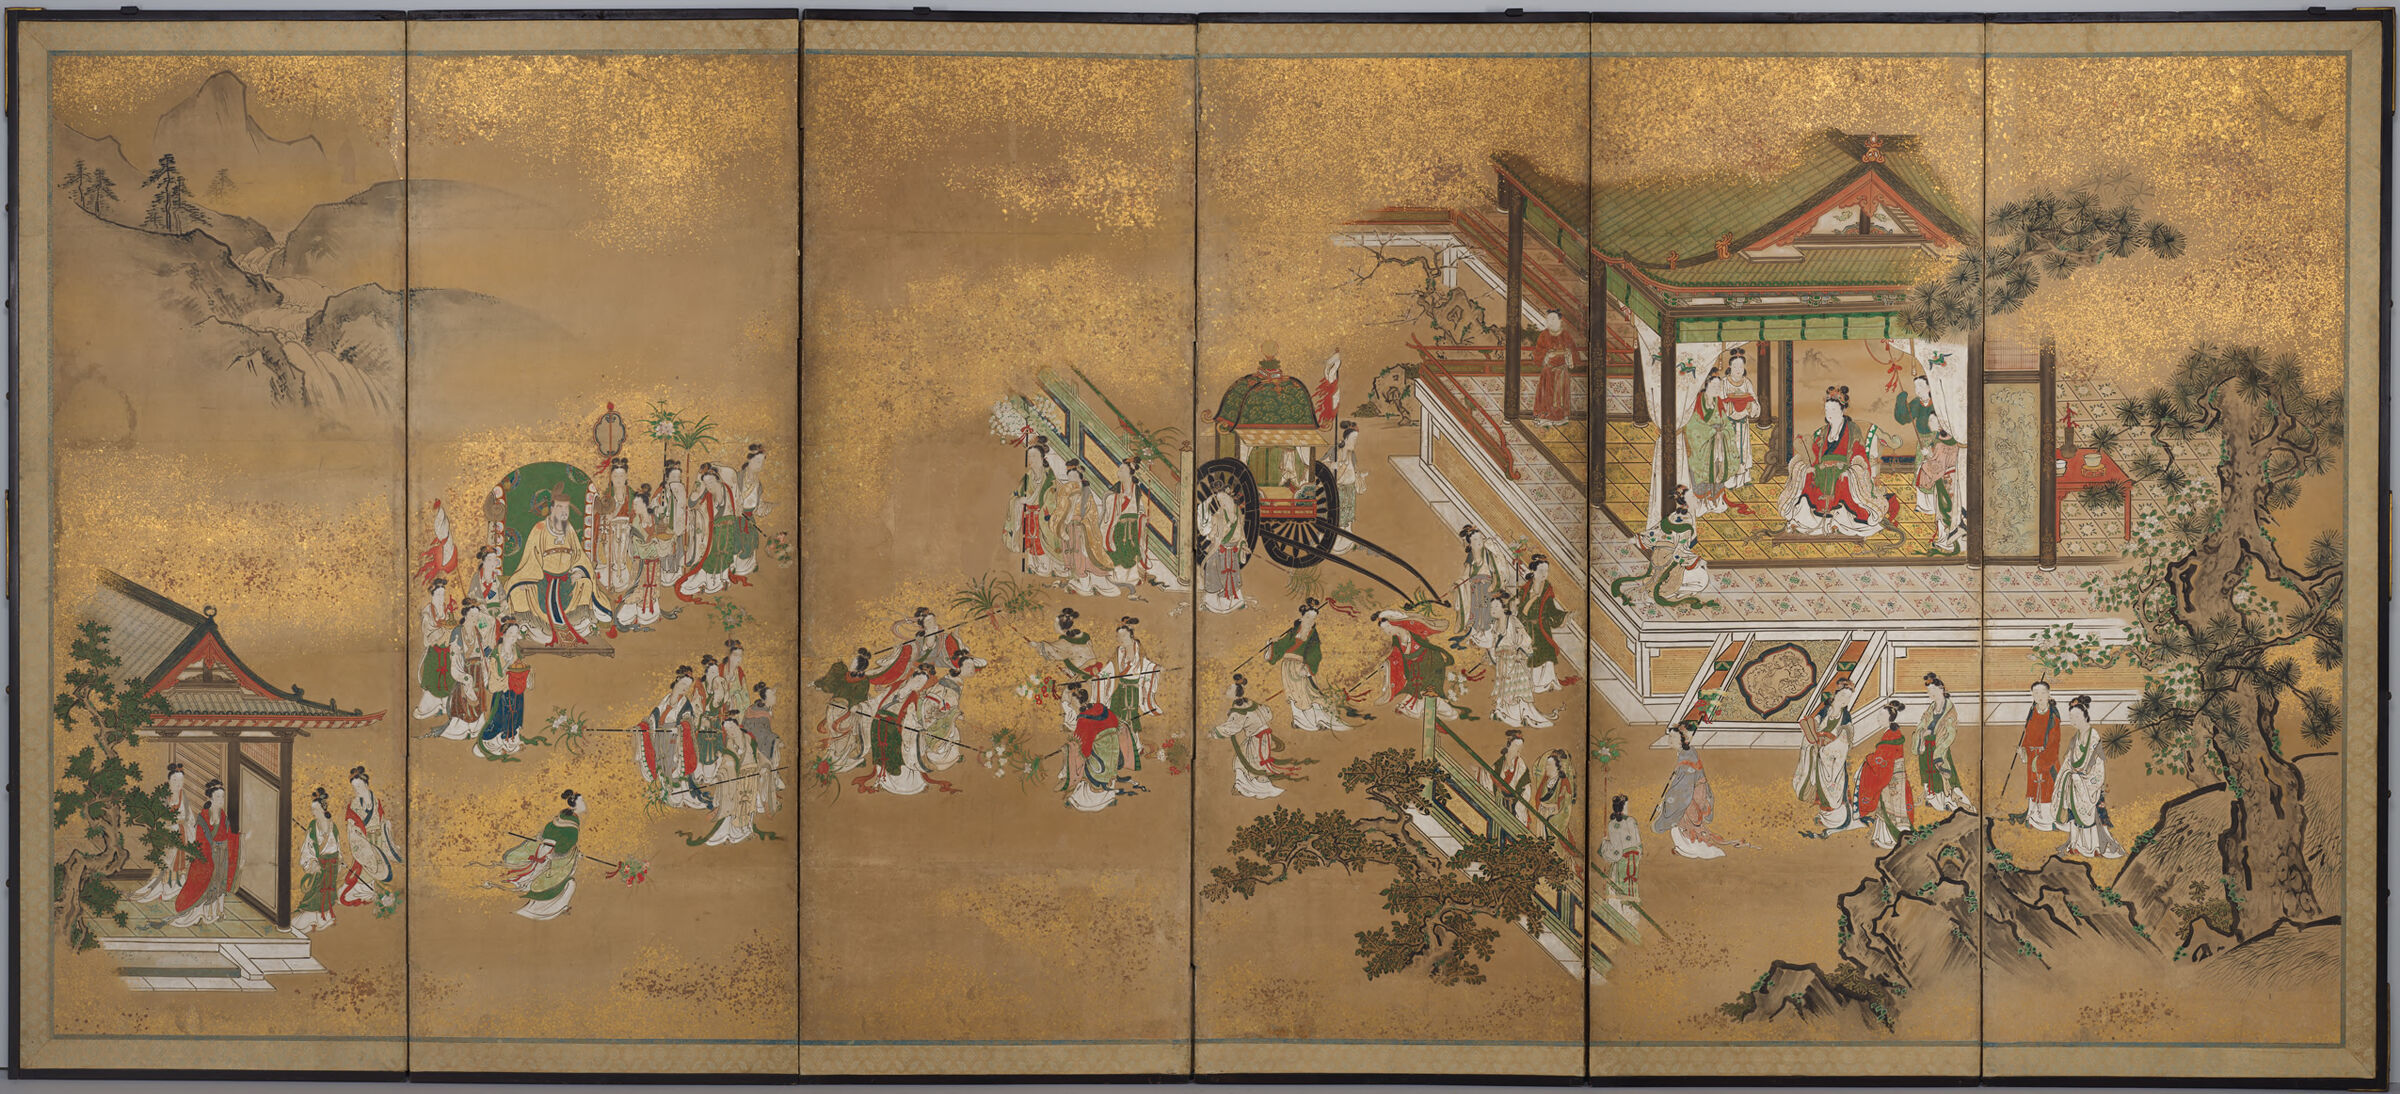 Illustrated Mirror Of Emperors And Song Of Everlasting Sorrow (Right)